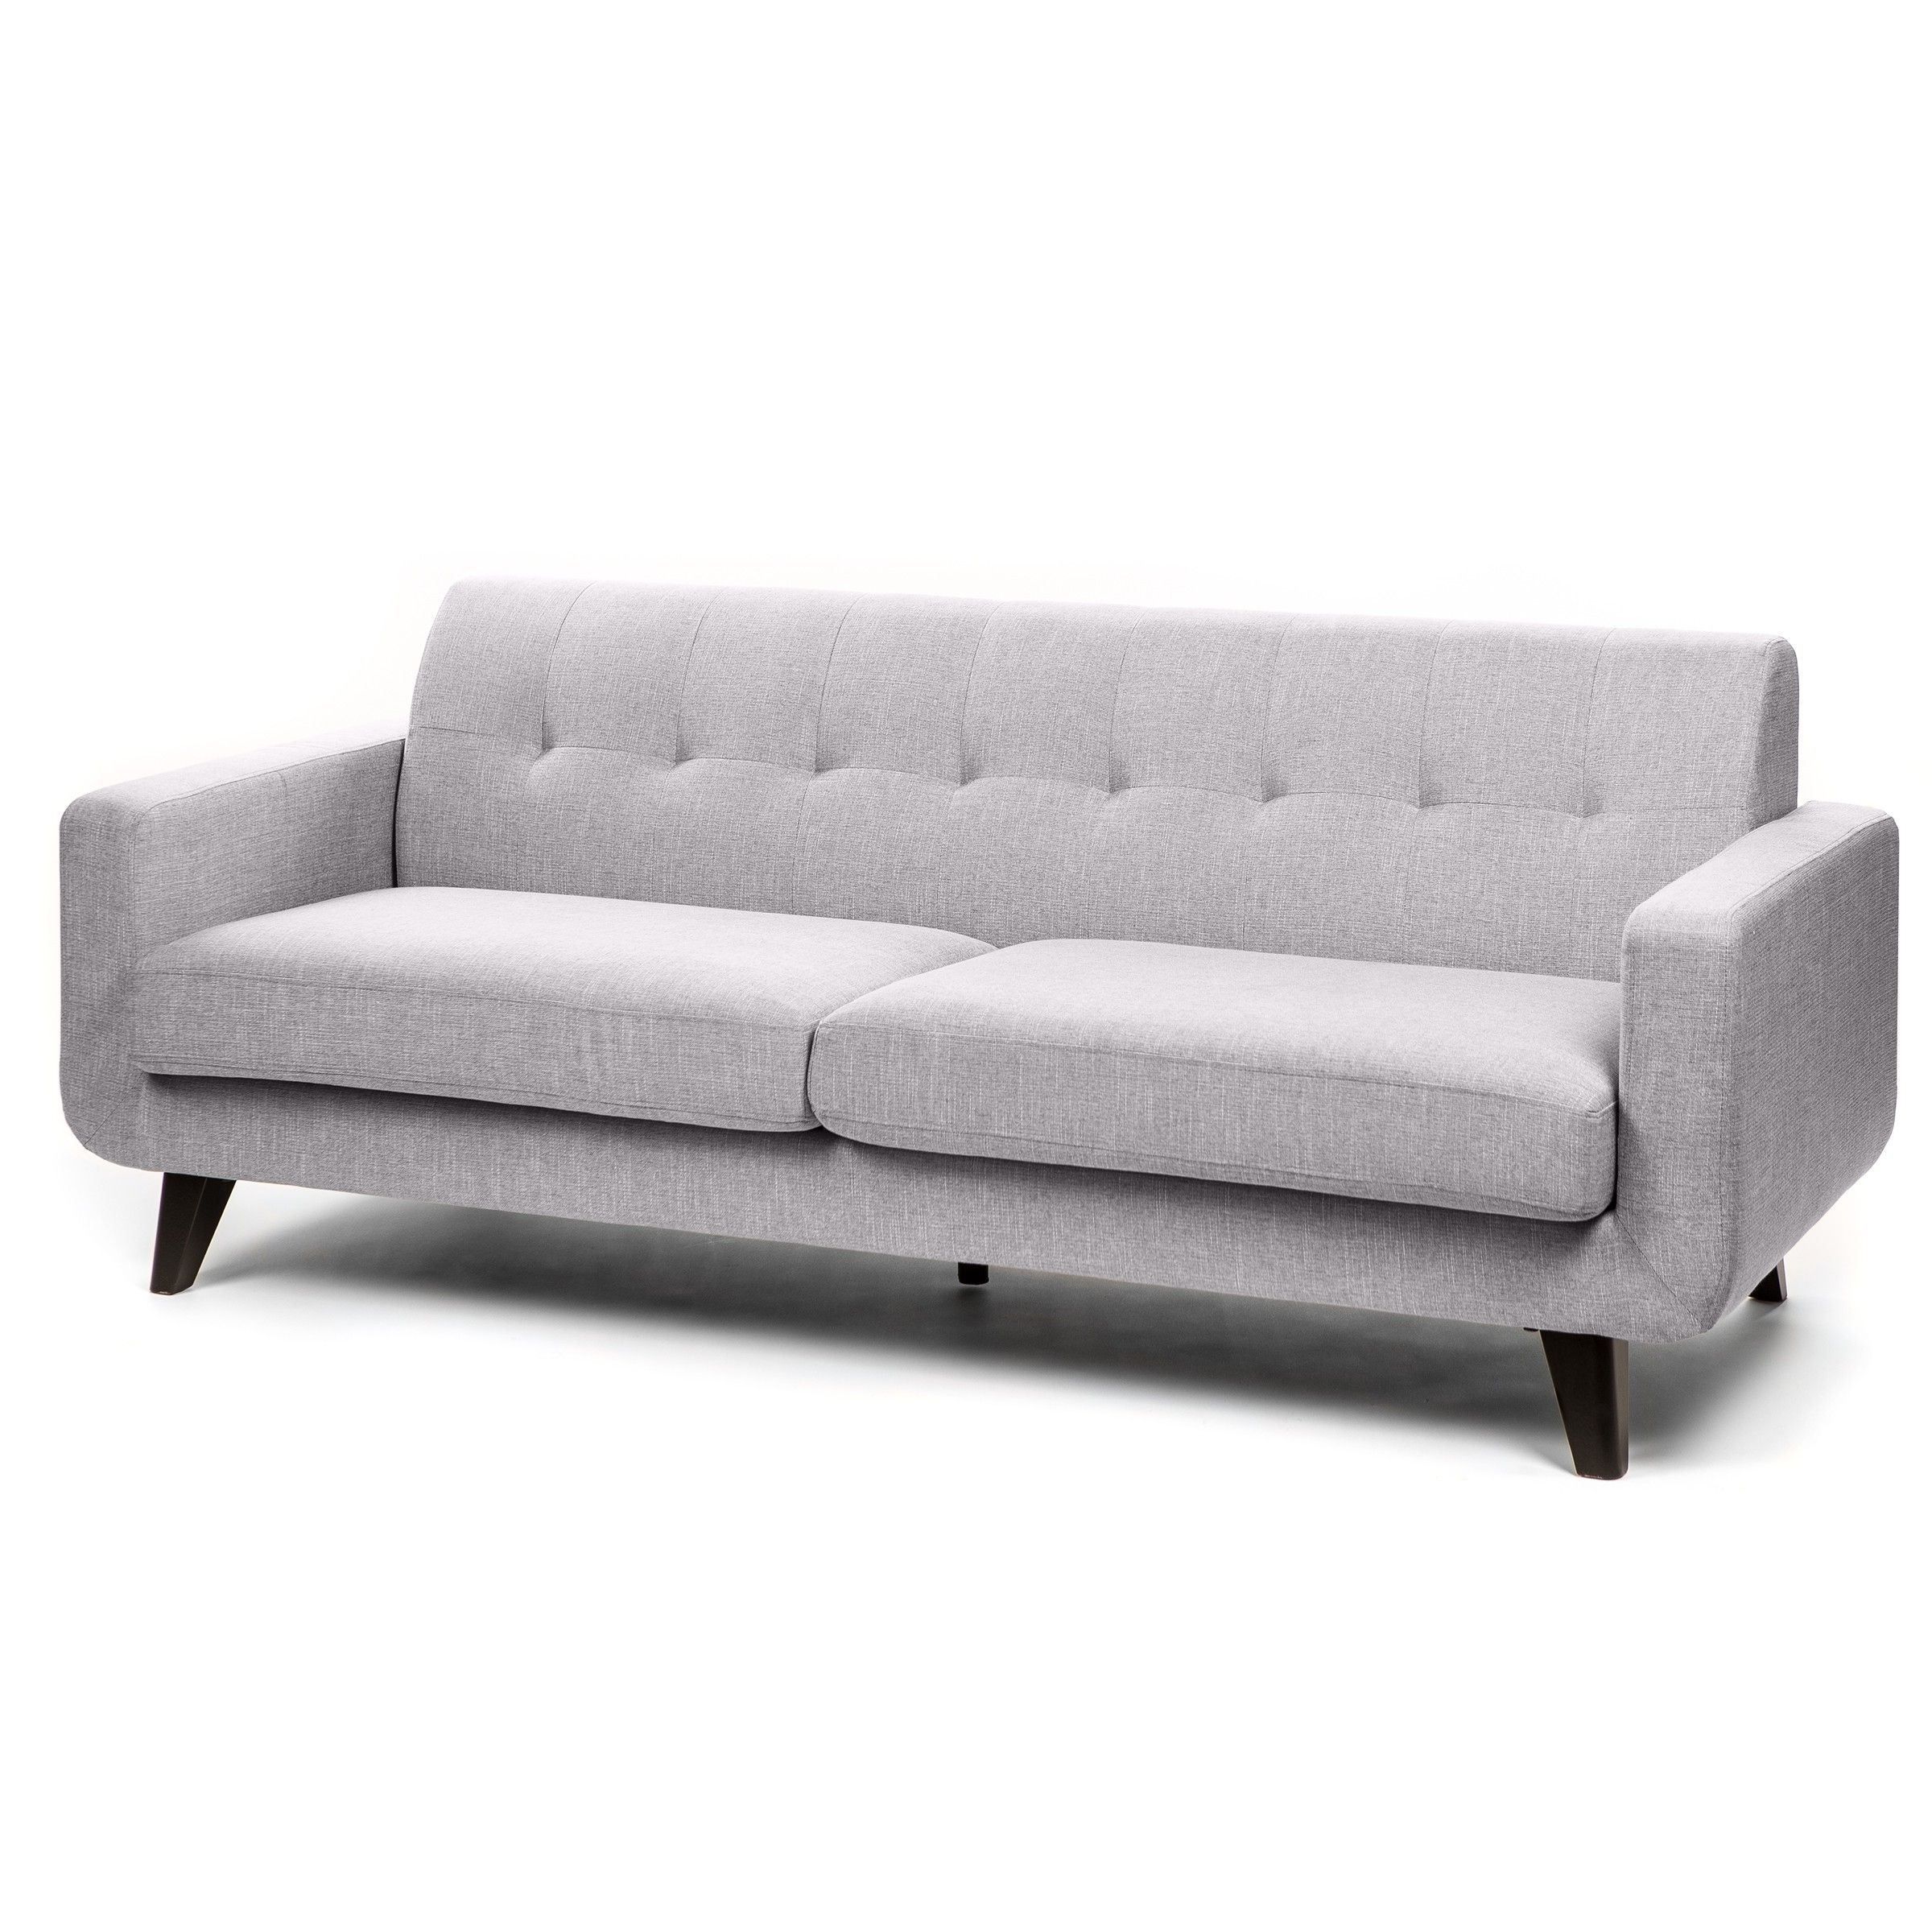 Fashionable Jysk Sectional Sofas Throughout Hansen Sofa Bed Jysk • Sofa Bed (Photo 14 of 15)